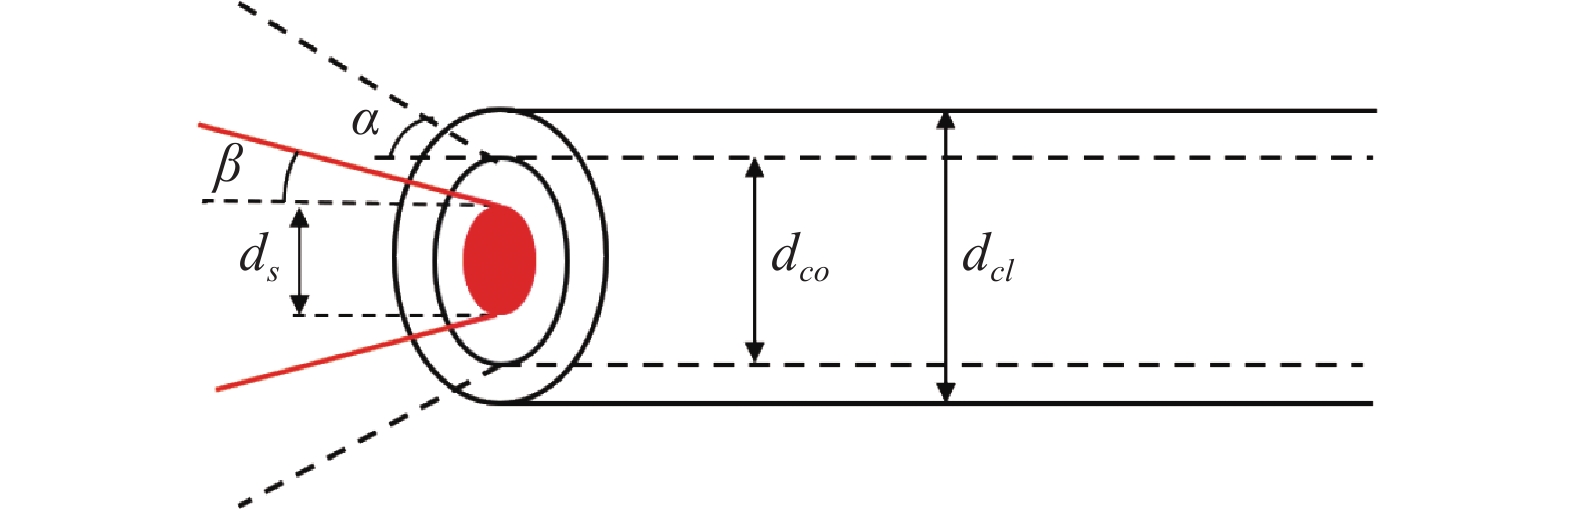 Schematic diagram of the optic switch coupling